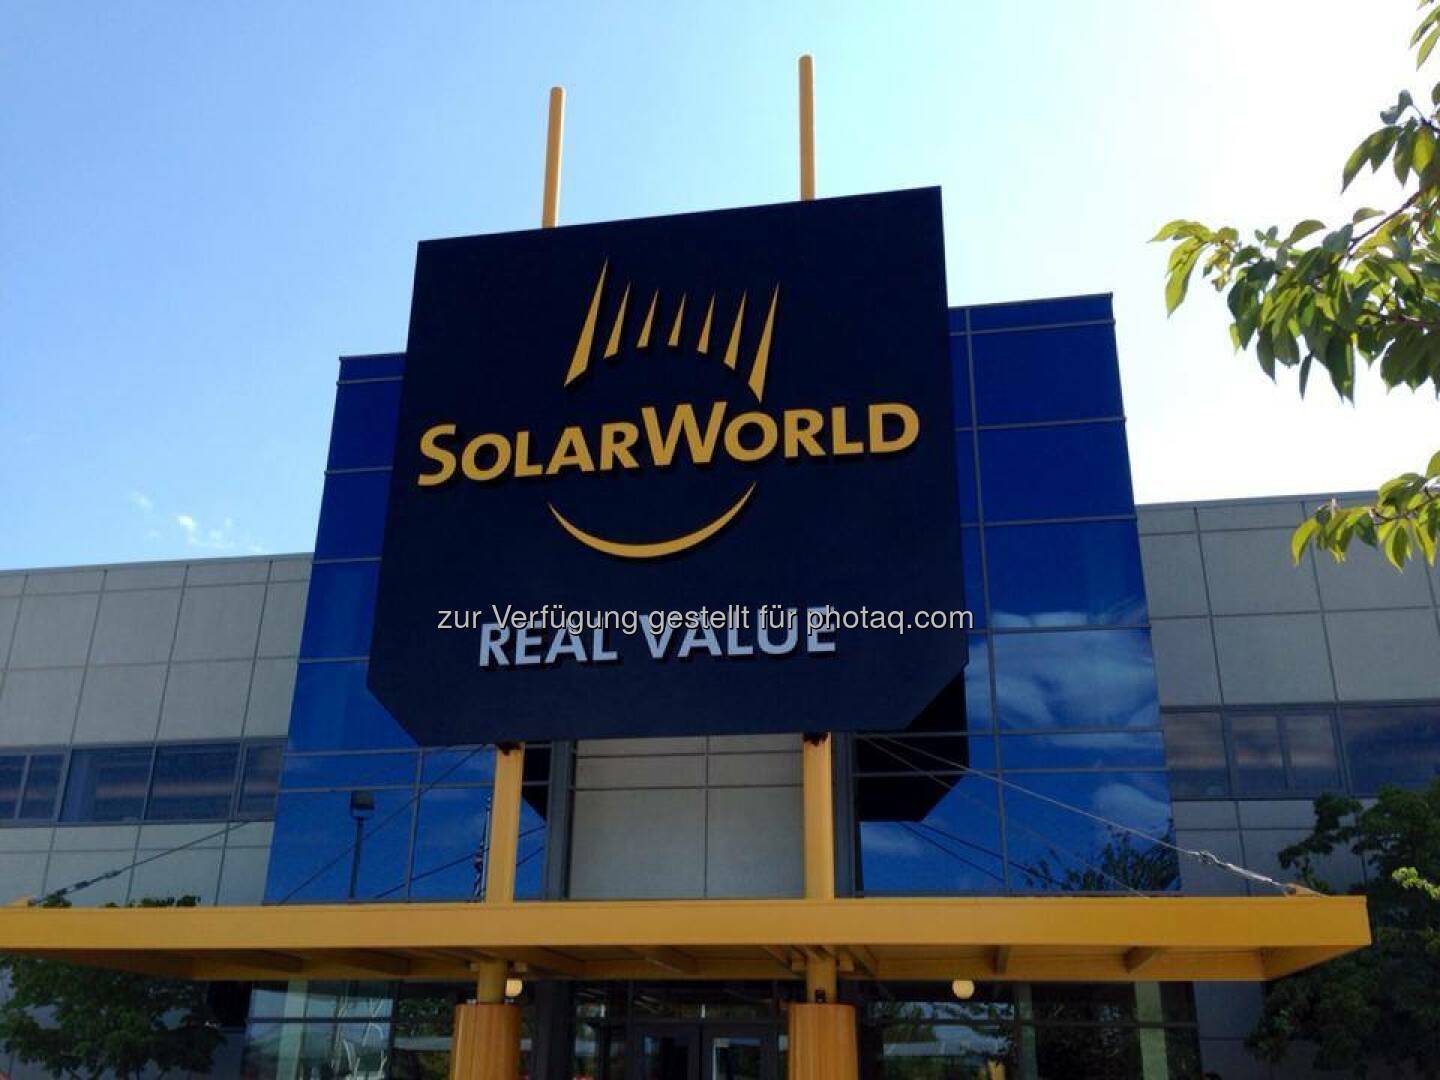 Big shout out to our installers, sponsors, employees and partners: Thanks for sharing a great day with us in Hillsboro. We hope you had as much fun in the sun as we did! #SolarWorldSummit2014  Source: http://facebook.com/SolarWorldUSA